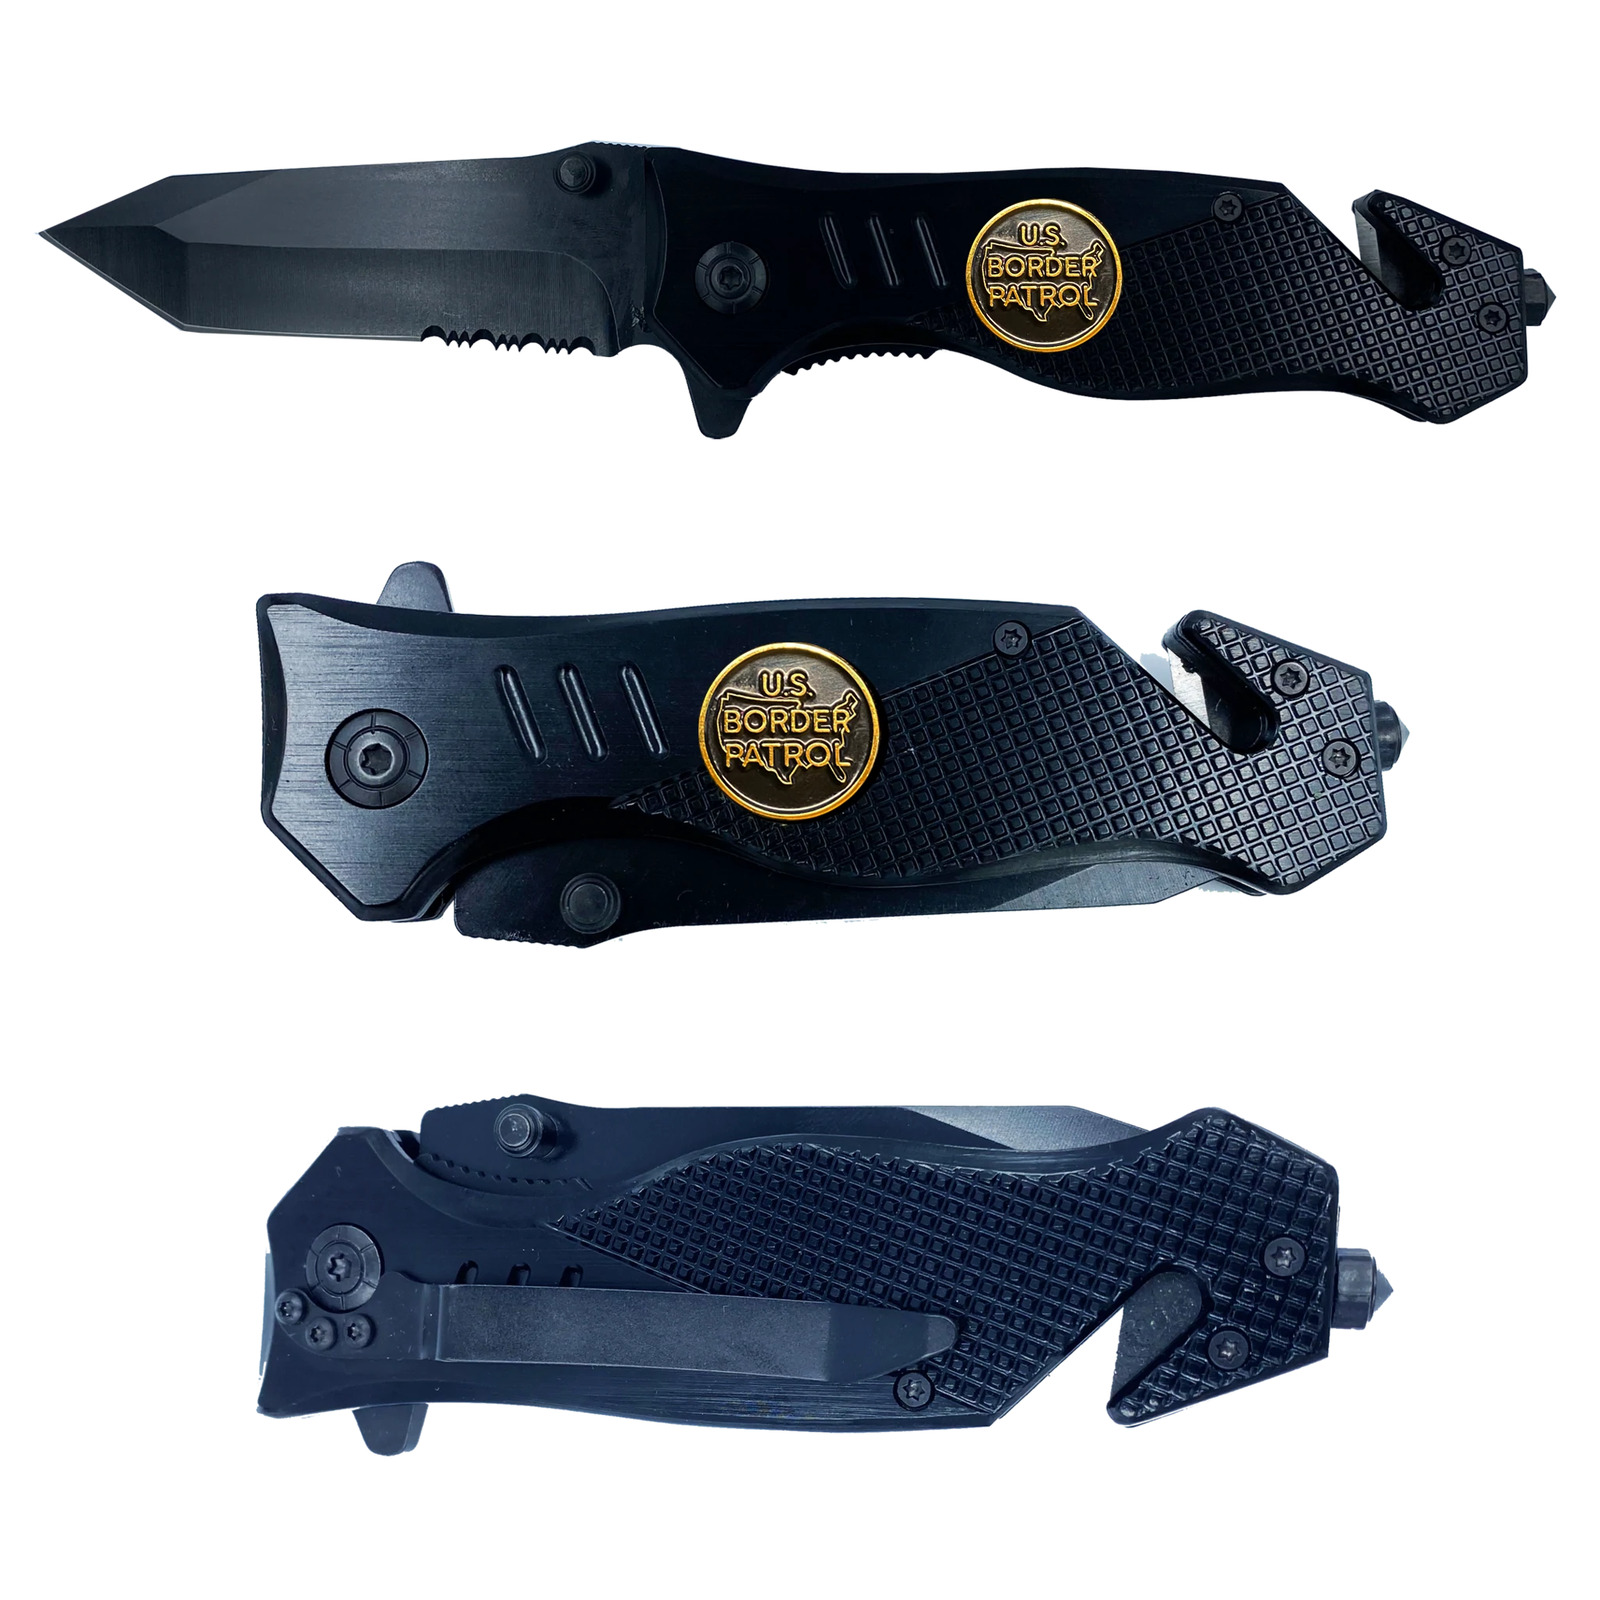 Border Patrol collectible BPA 3-in-1 Police Tactical Rescue knife tool with Seat